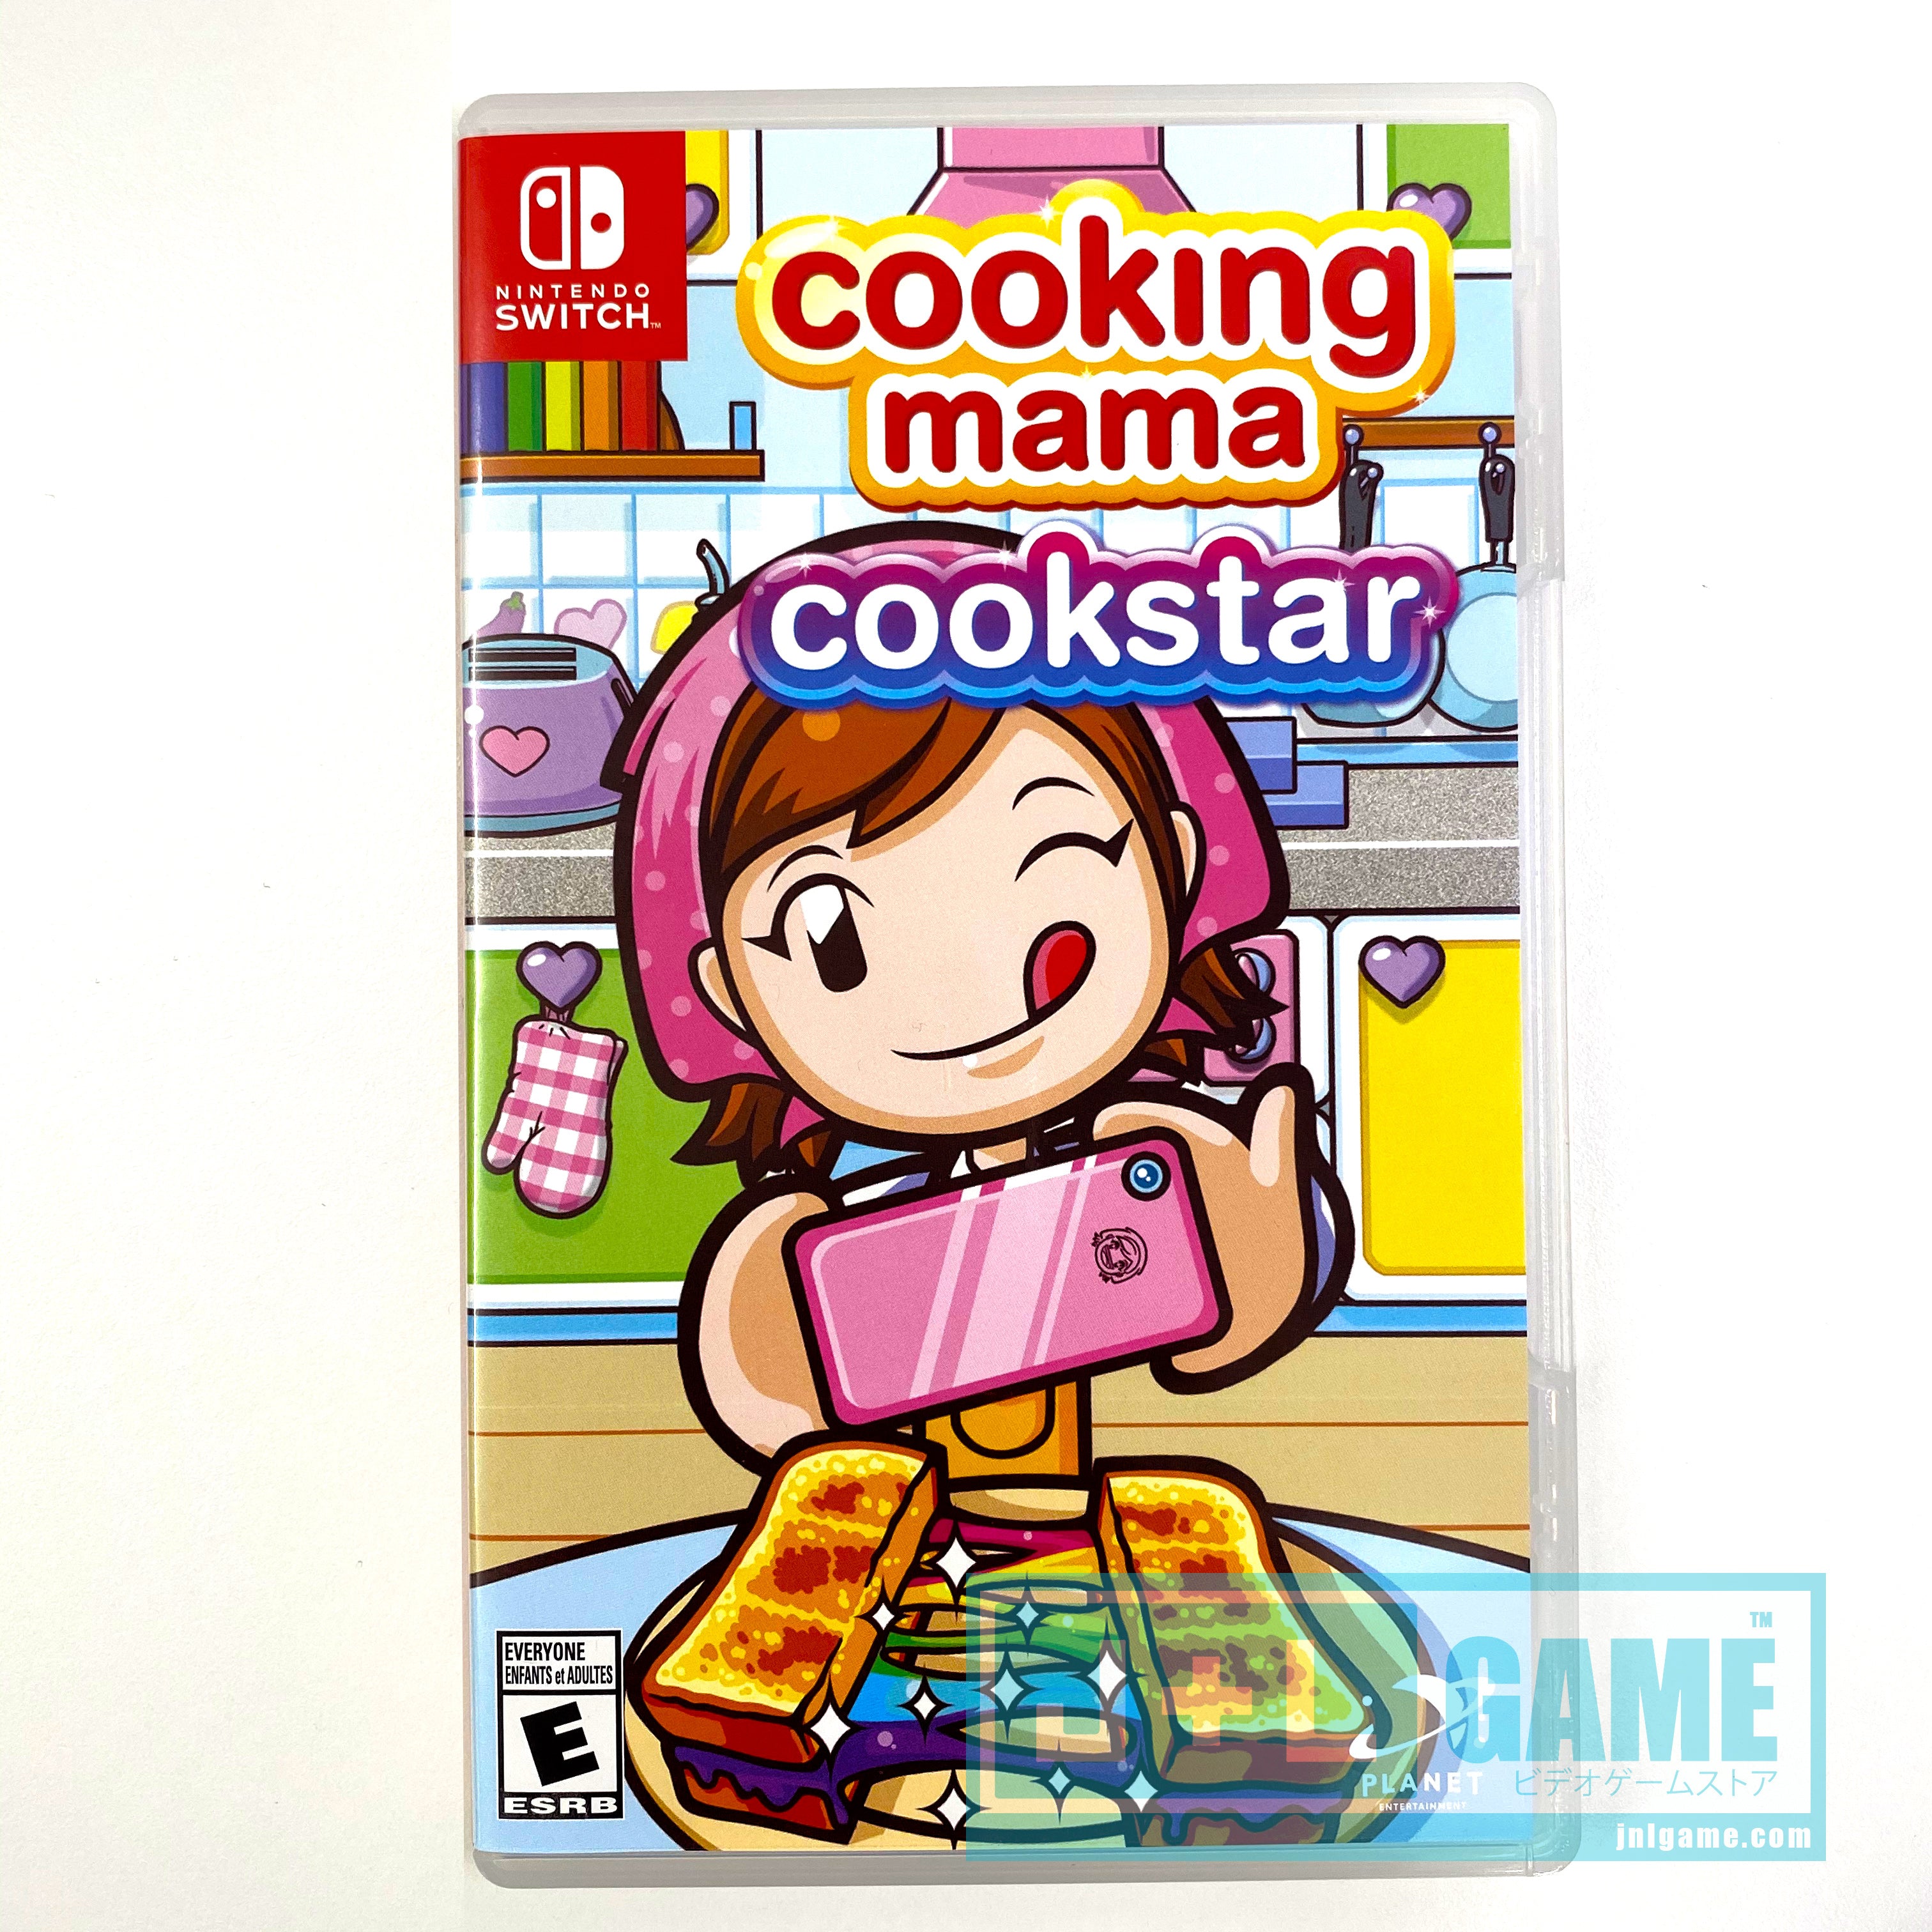 Cooking Mama: Cookstar 2020 - (NSW) Nintendo Switch [UNBOXING] Video Games COKeM   